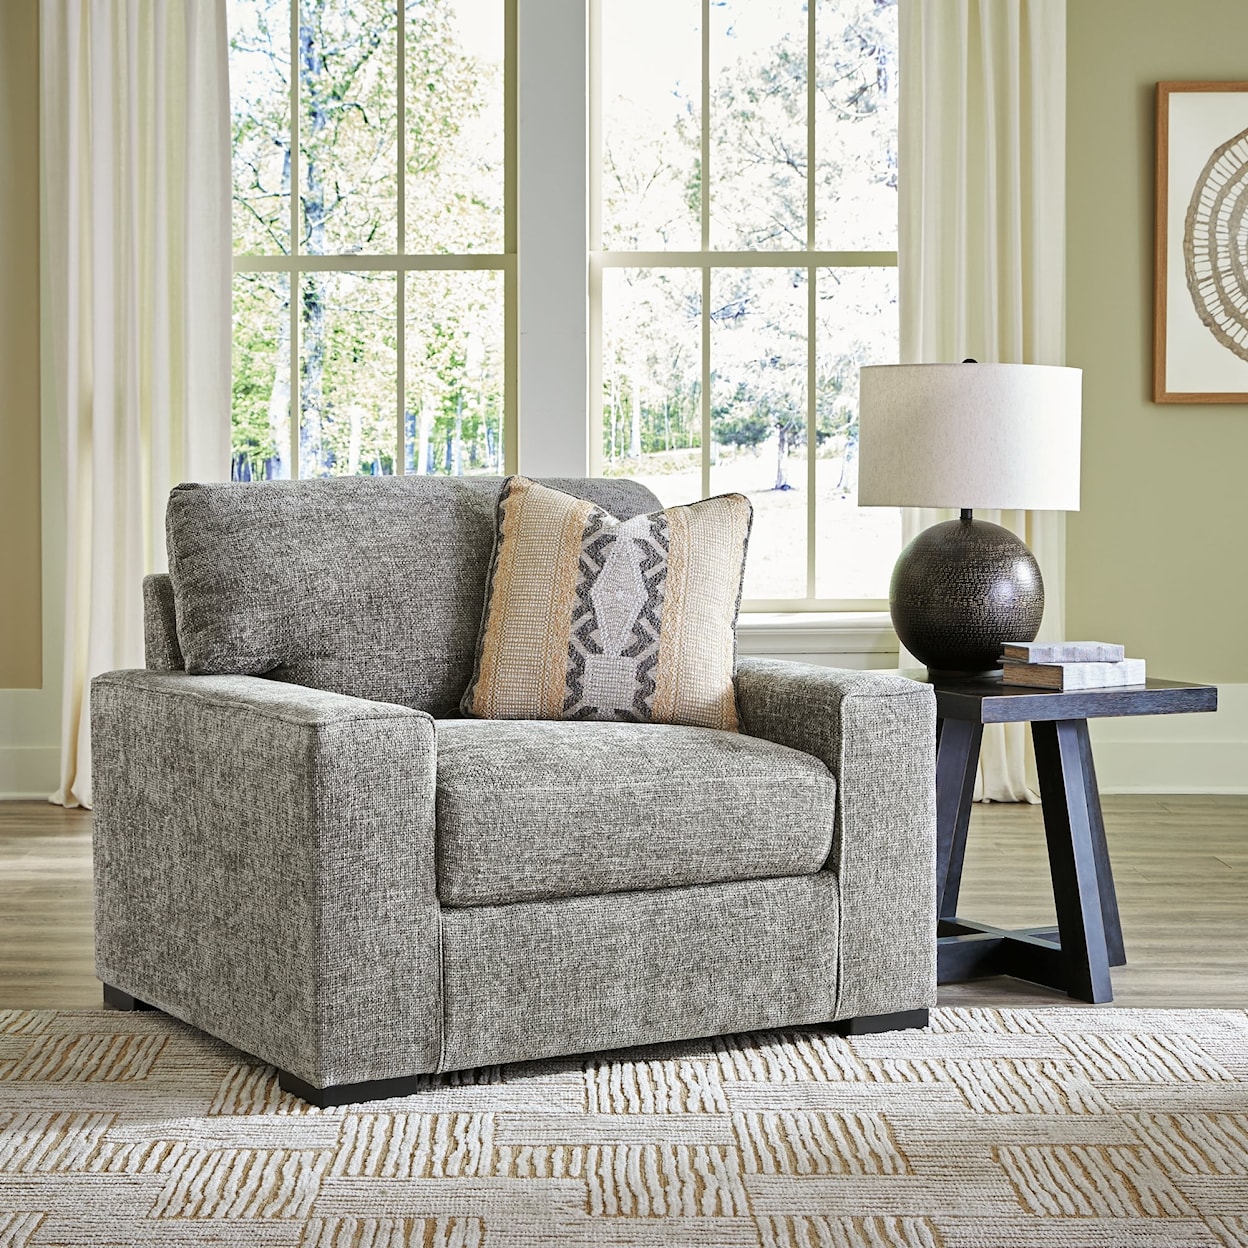 Signature Design by Ashley Furniture Dunmor Oversized Chair